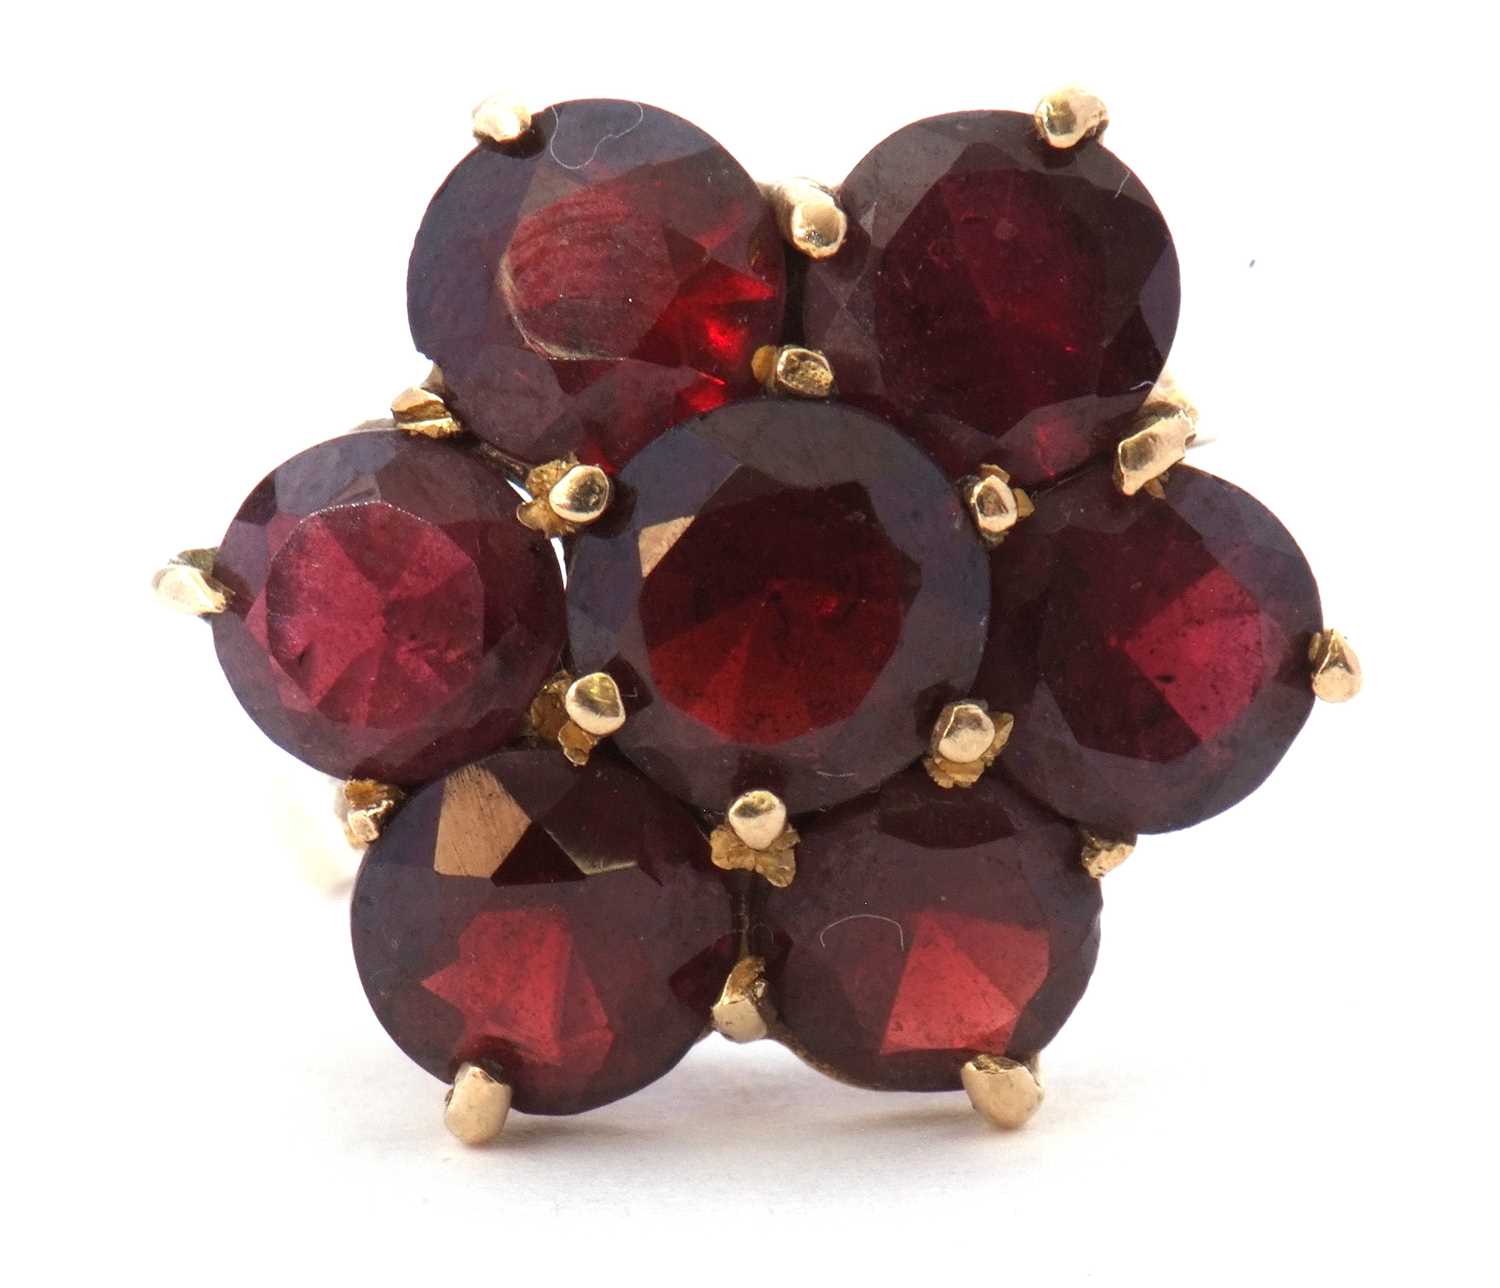 9ct gold large garnet cluster ring featuring seven round garnets, head size 18mm diameter, all in